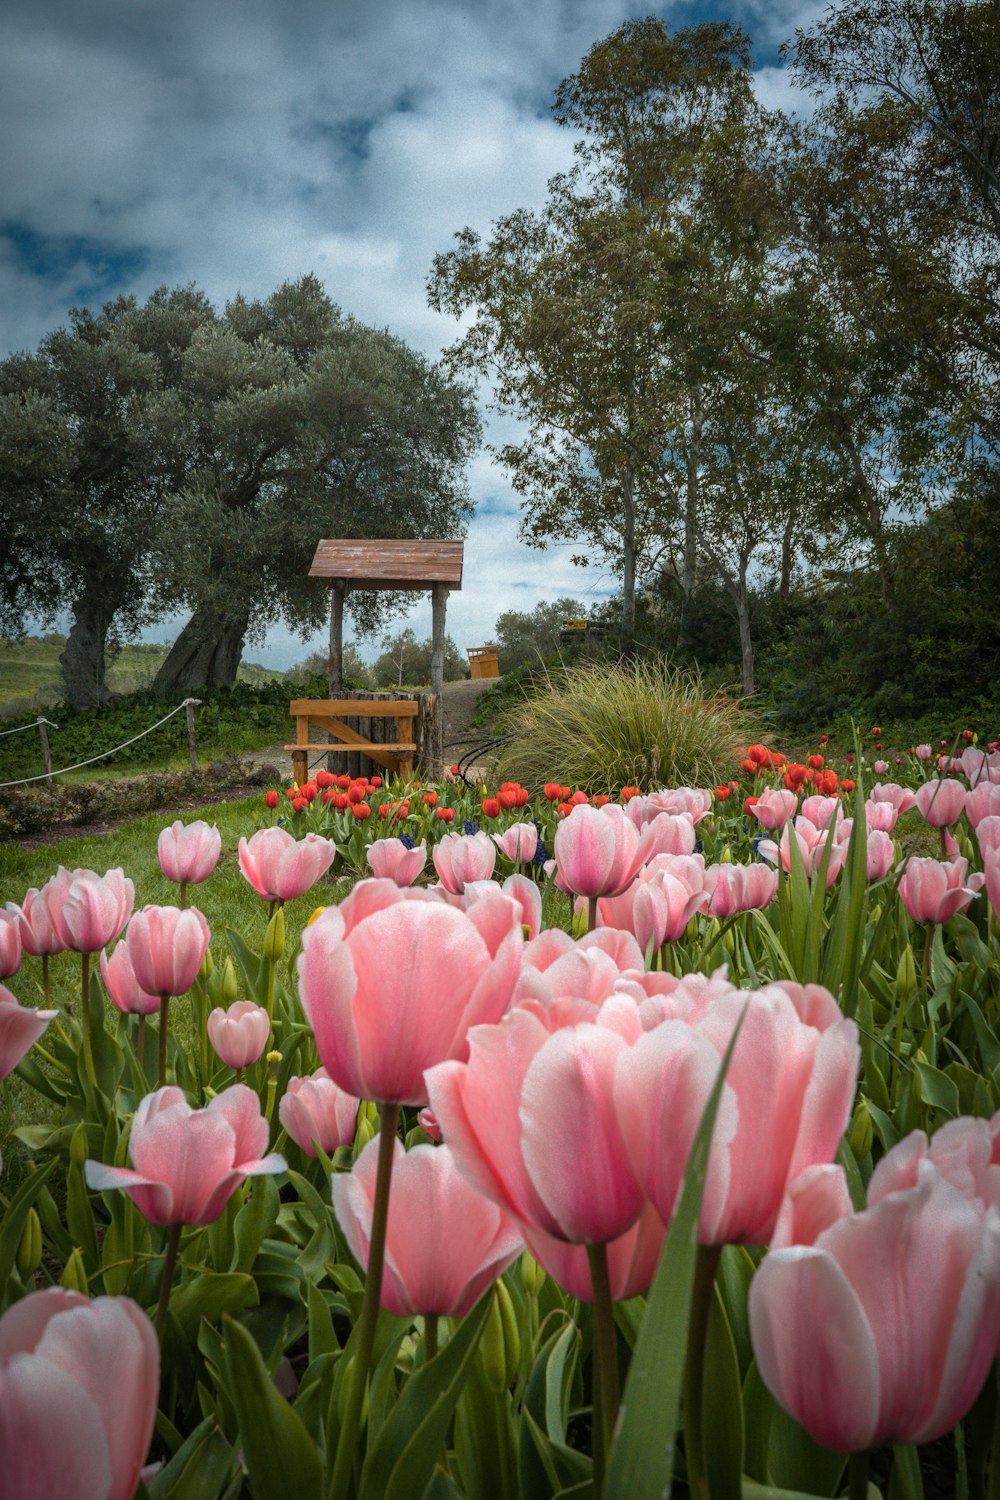 pink tulips near brown wooden bench under blue sky during daytime